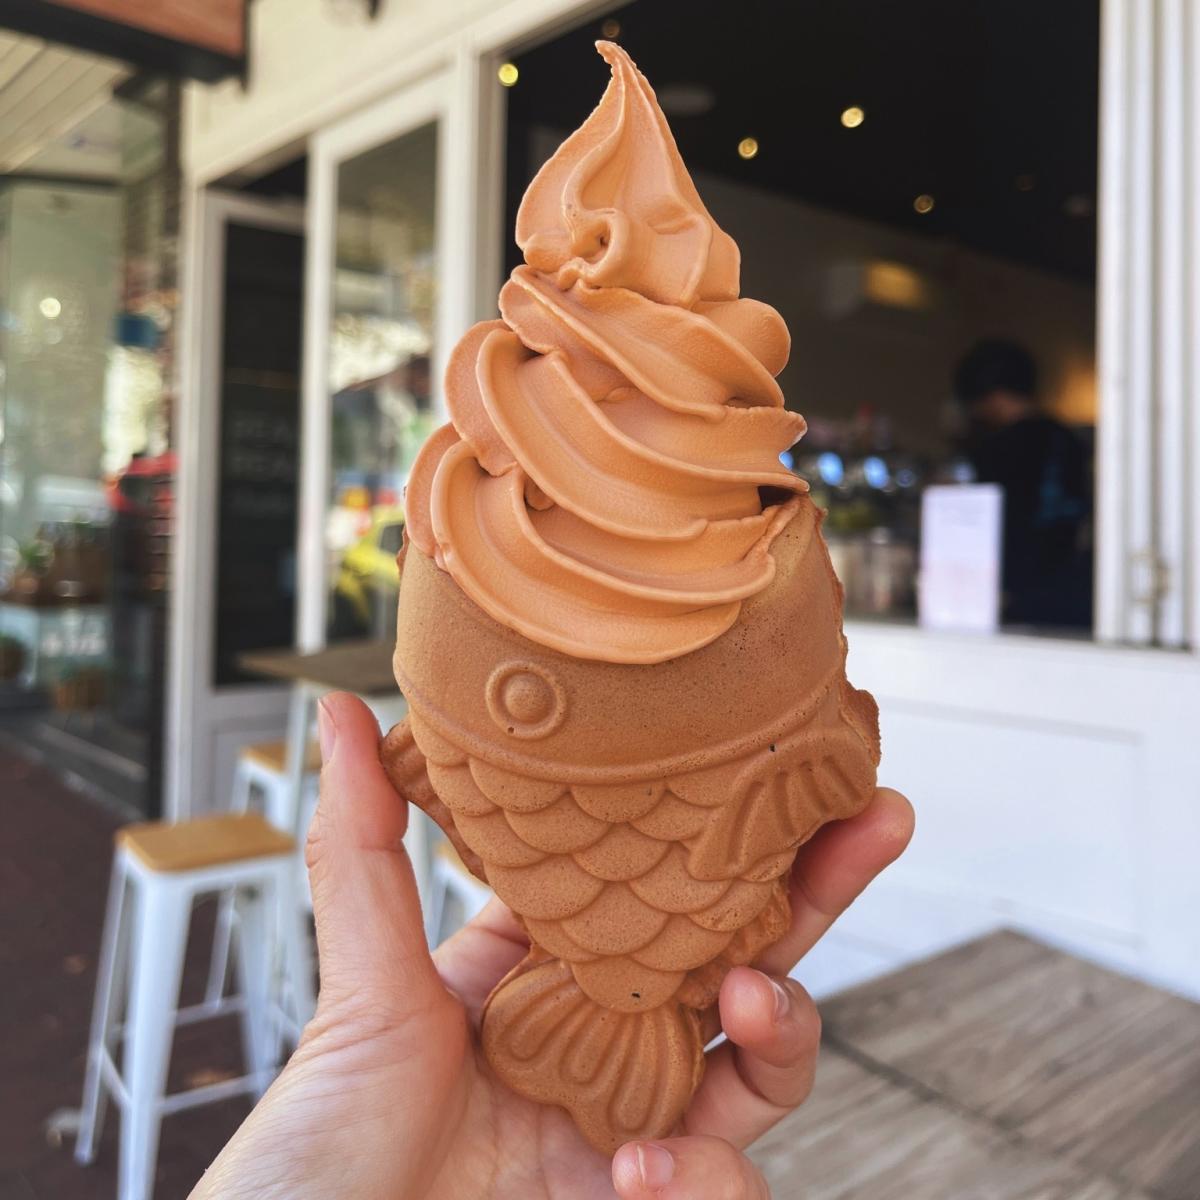 Whisk Creamery | Image Source <a href="https://www.instagram.com/whiskcreamery/">Whisk Creamery Instagram Page</a>